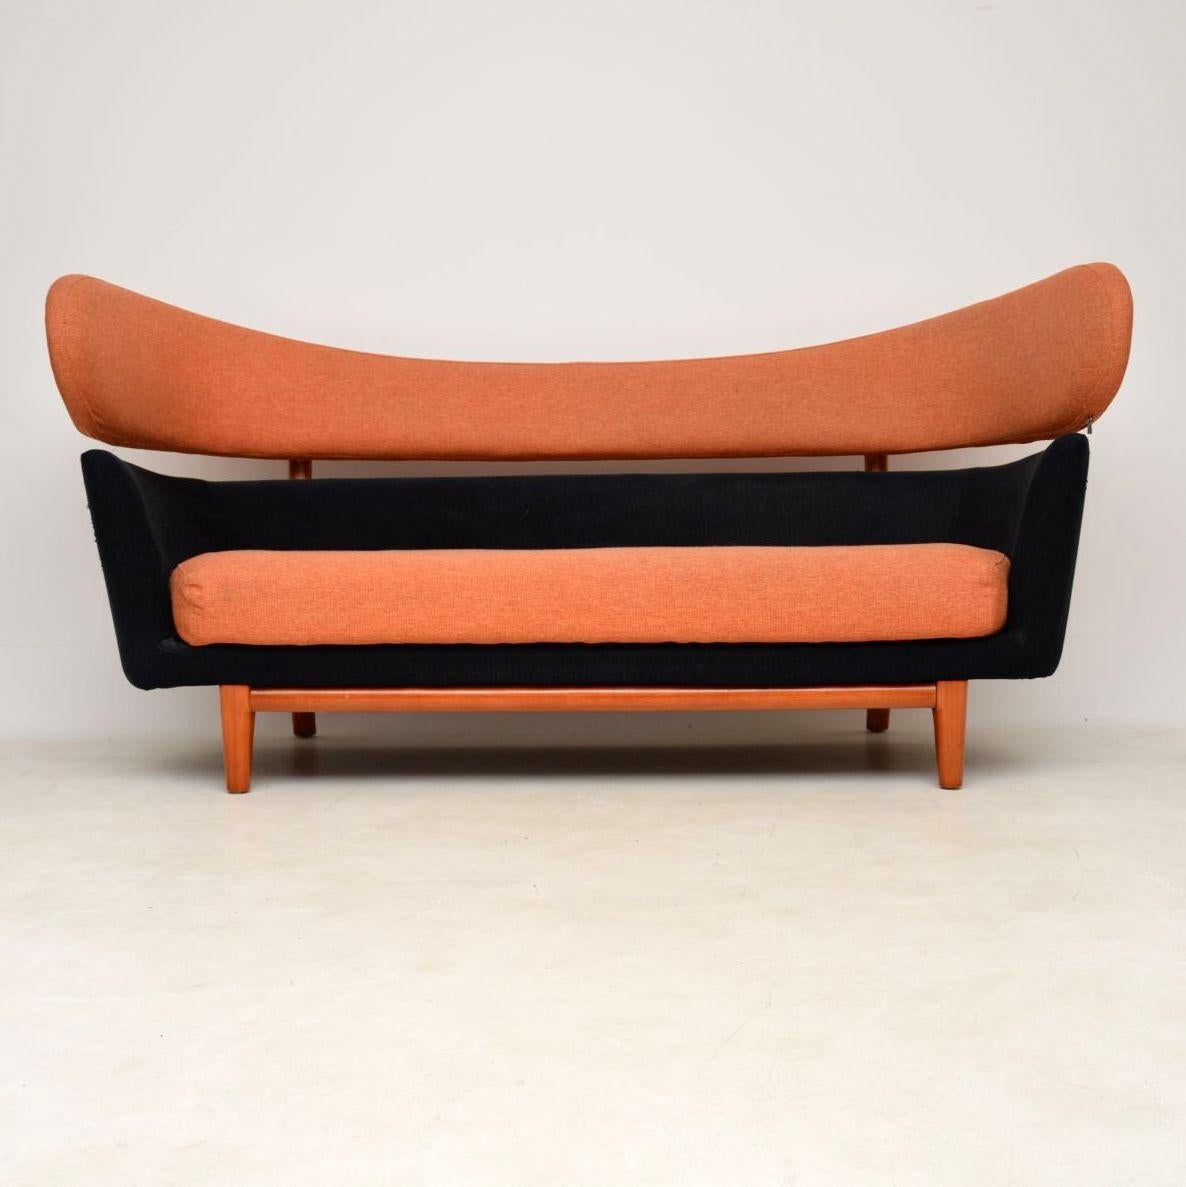 This is a very high quality retro style sofa, inspired by the Classic Finn Juhl design for Baker furniture in the 1950’s. This example dates from the late 20th century, it’s very well made and is in very good condition. There is just some light